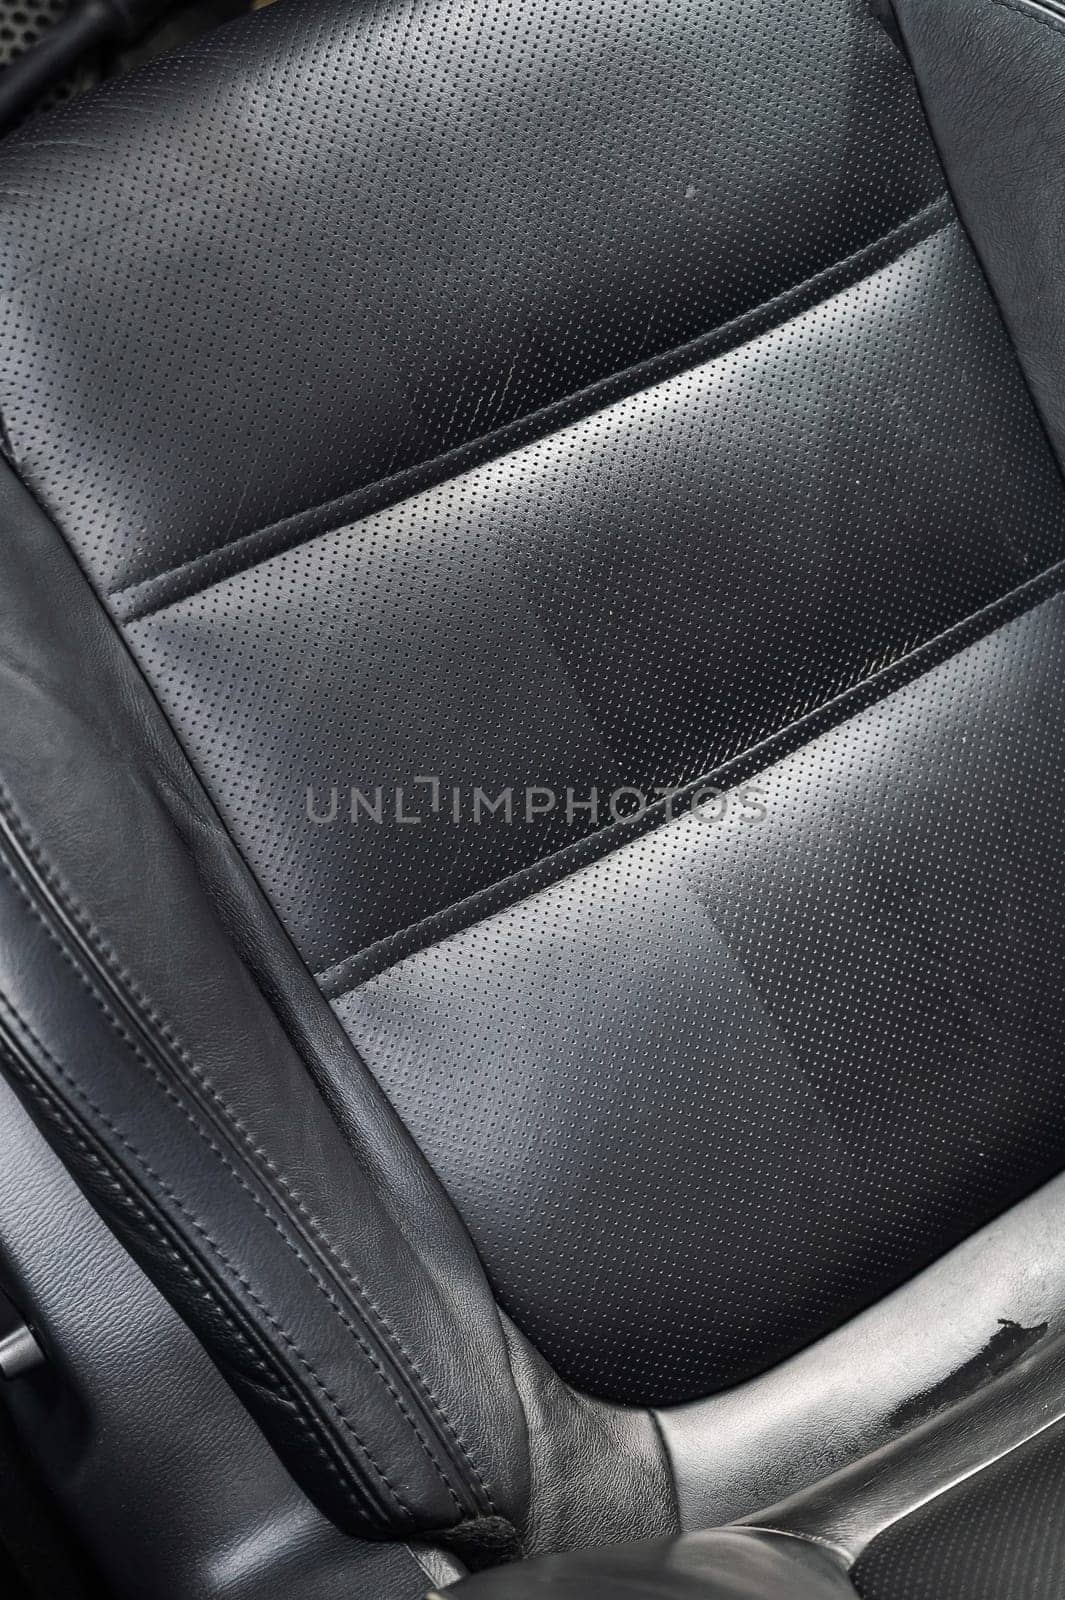 Close-up of black leather car seats. by mrwed54